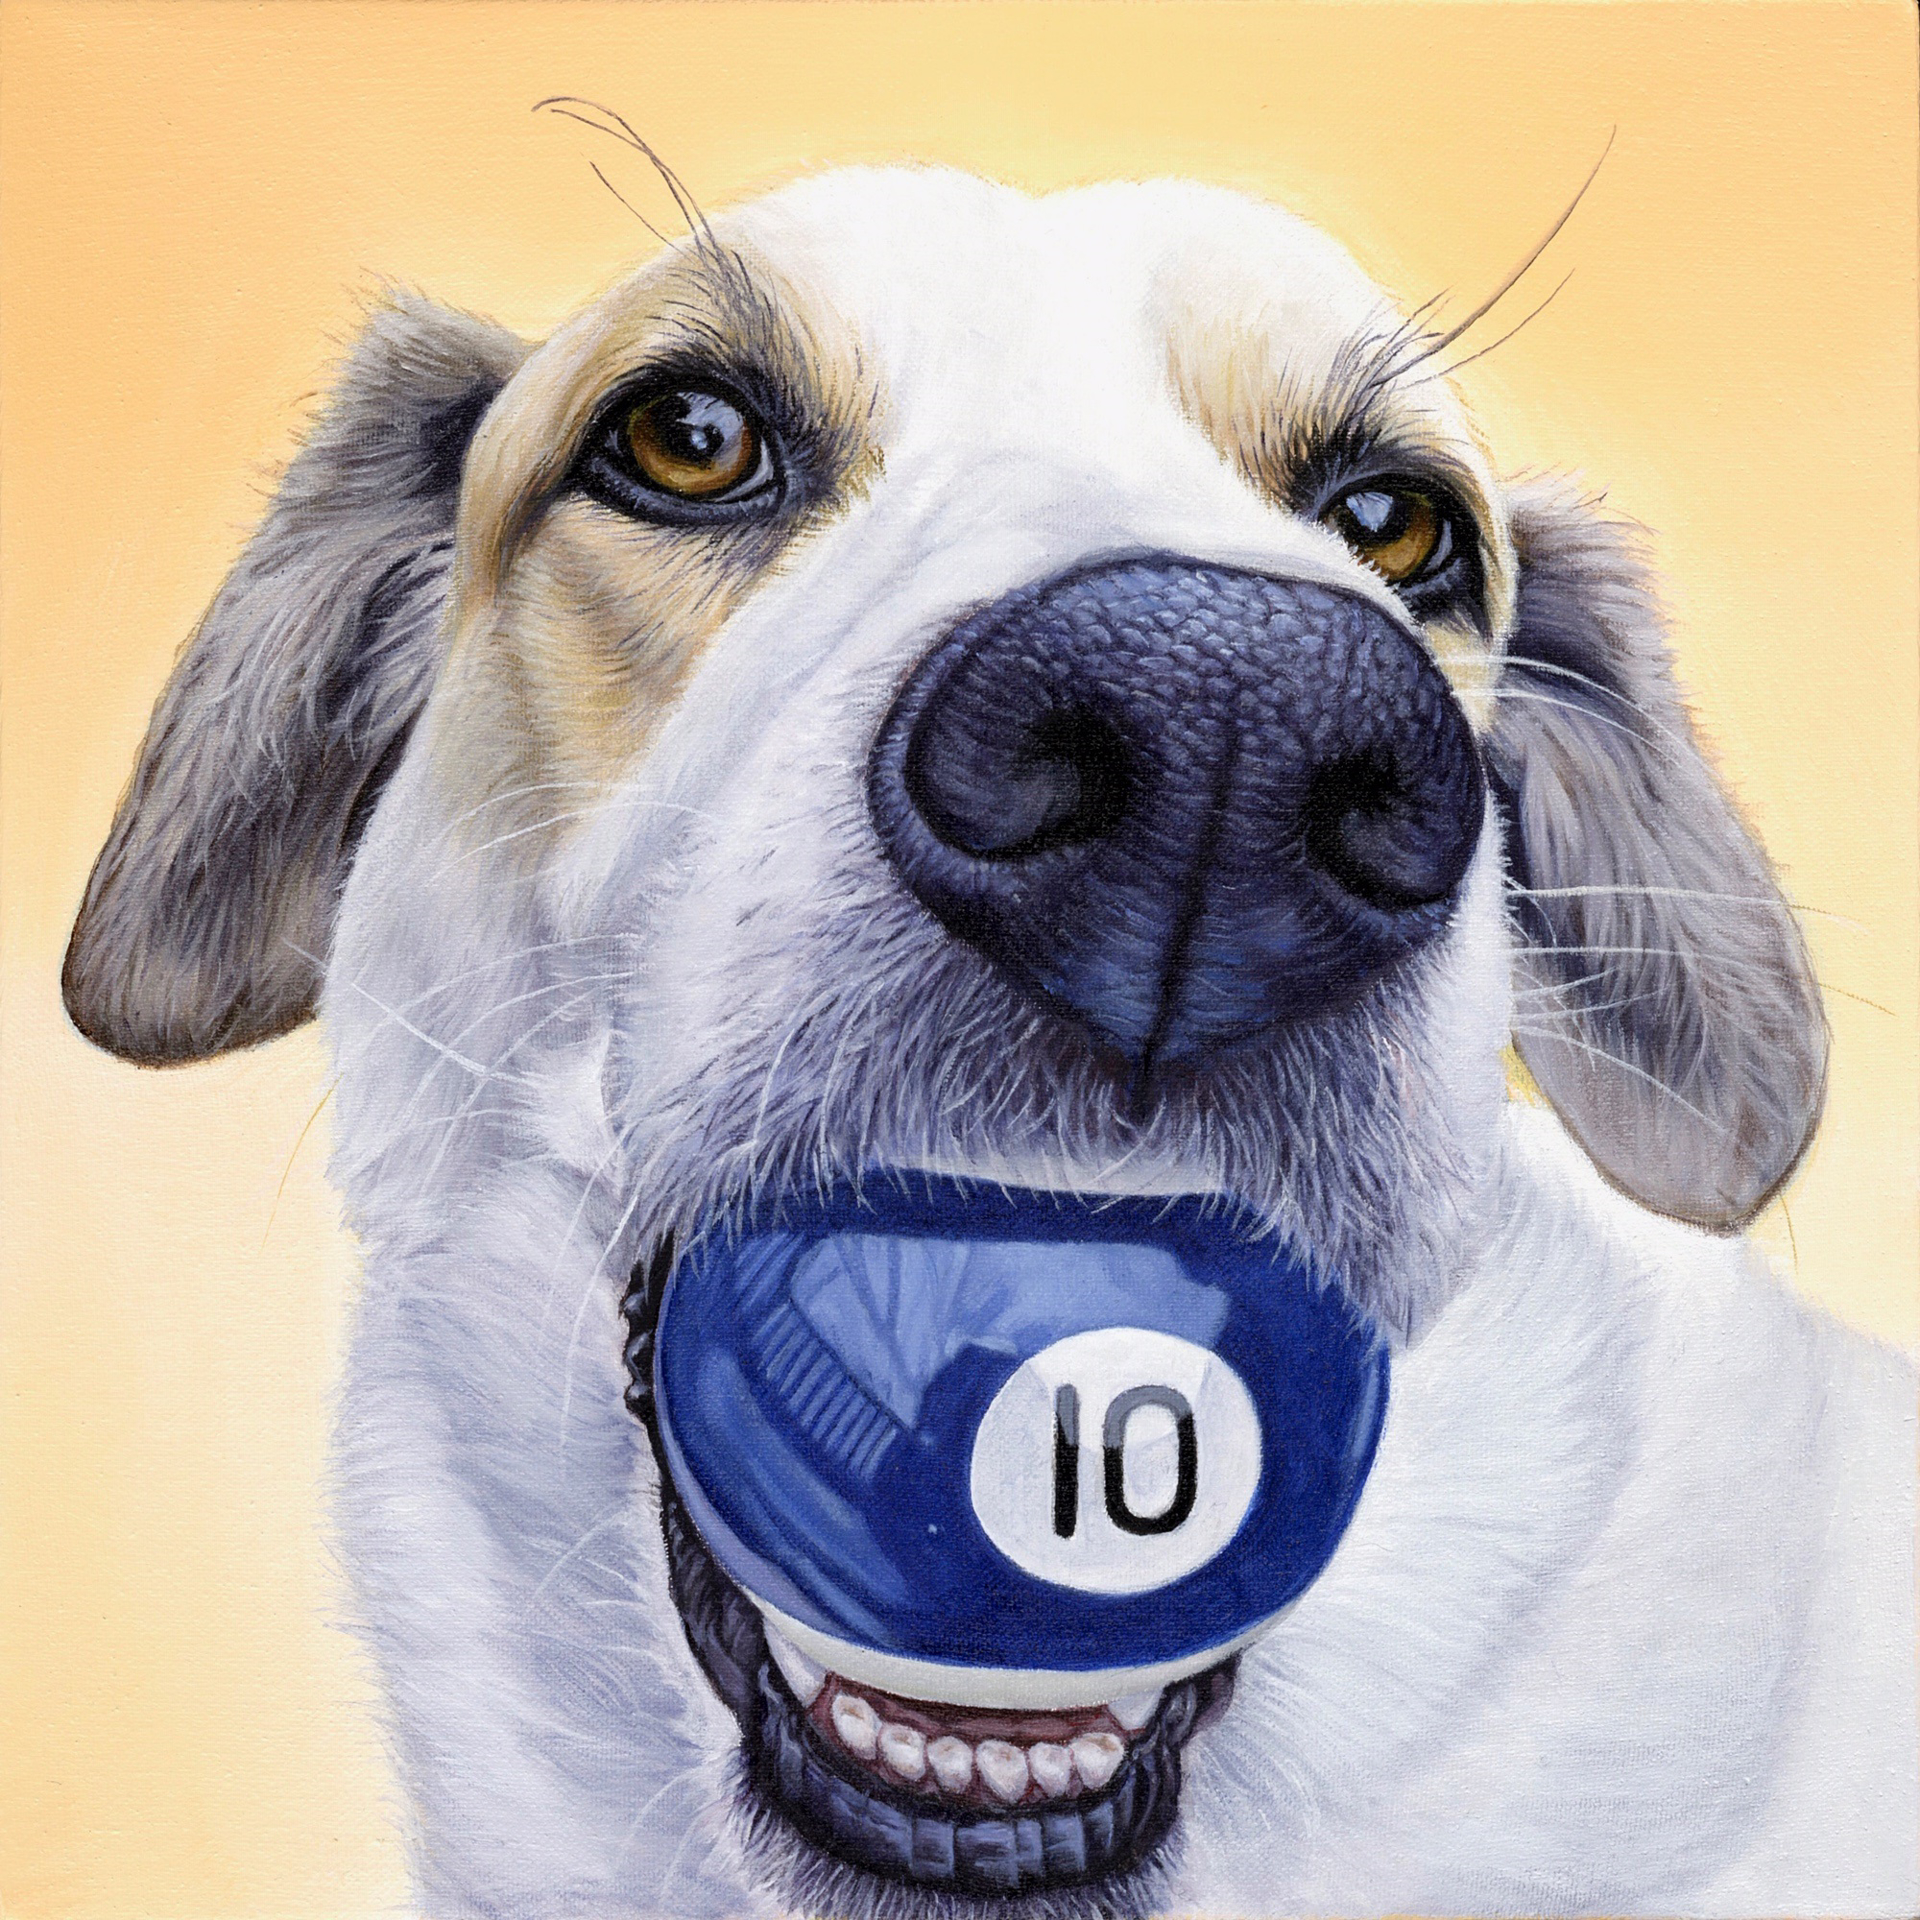 "10" by PET PORTRAITS by James Ruby